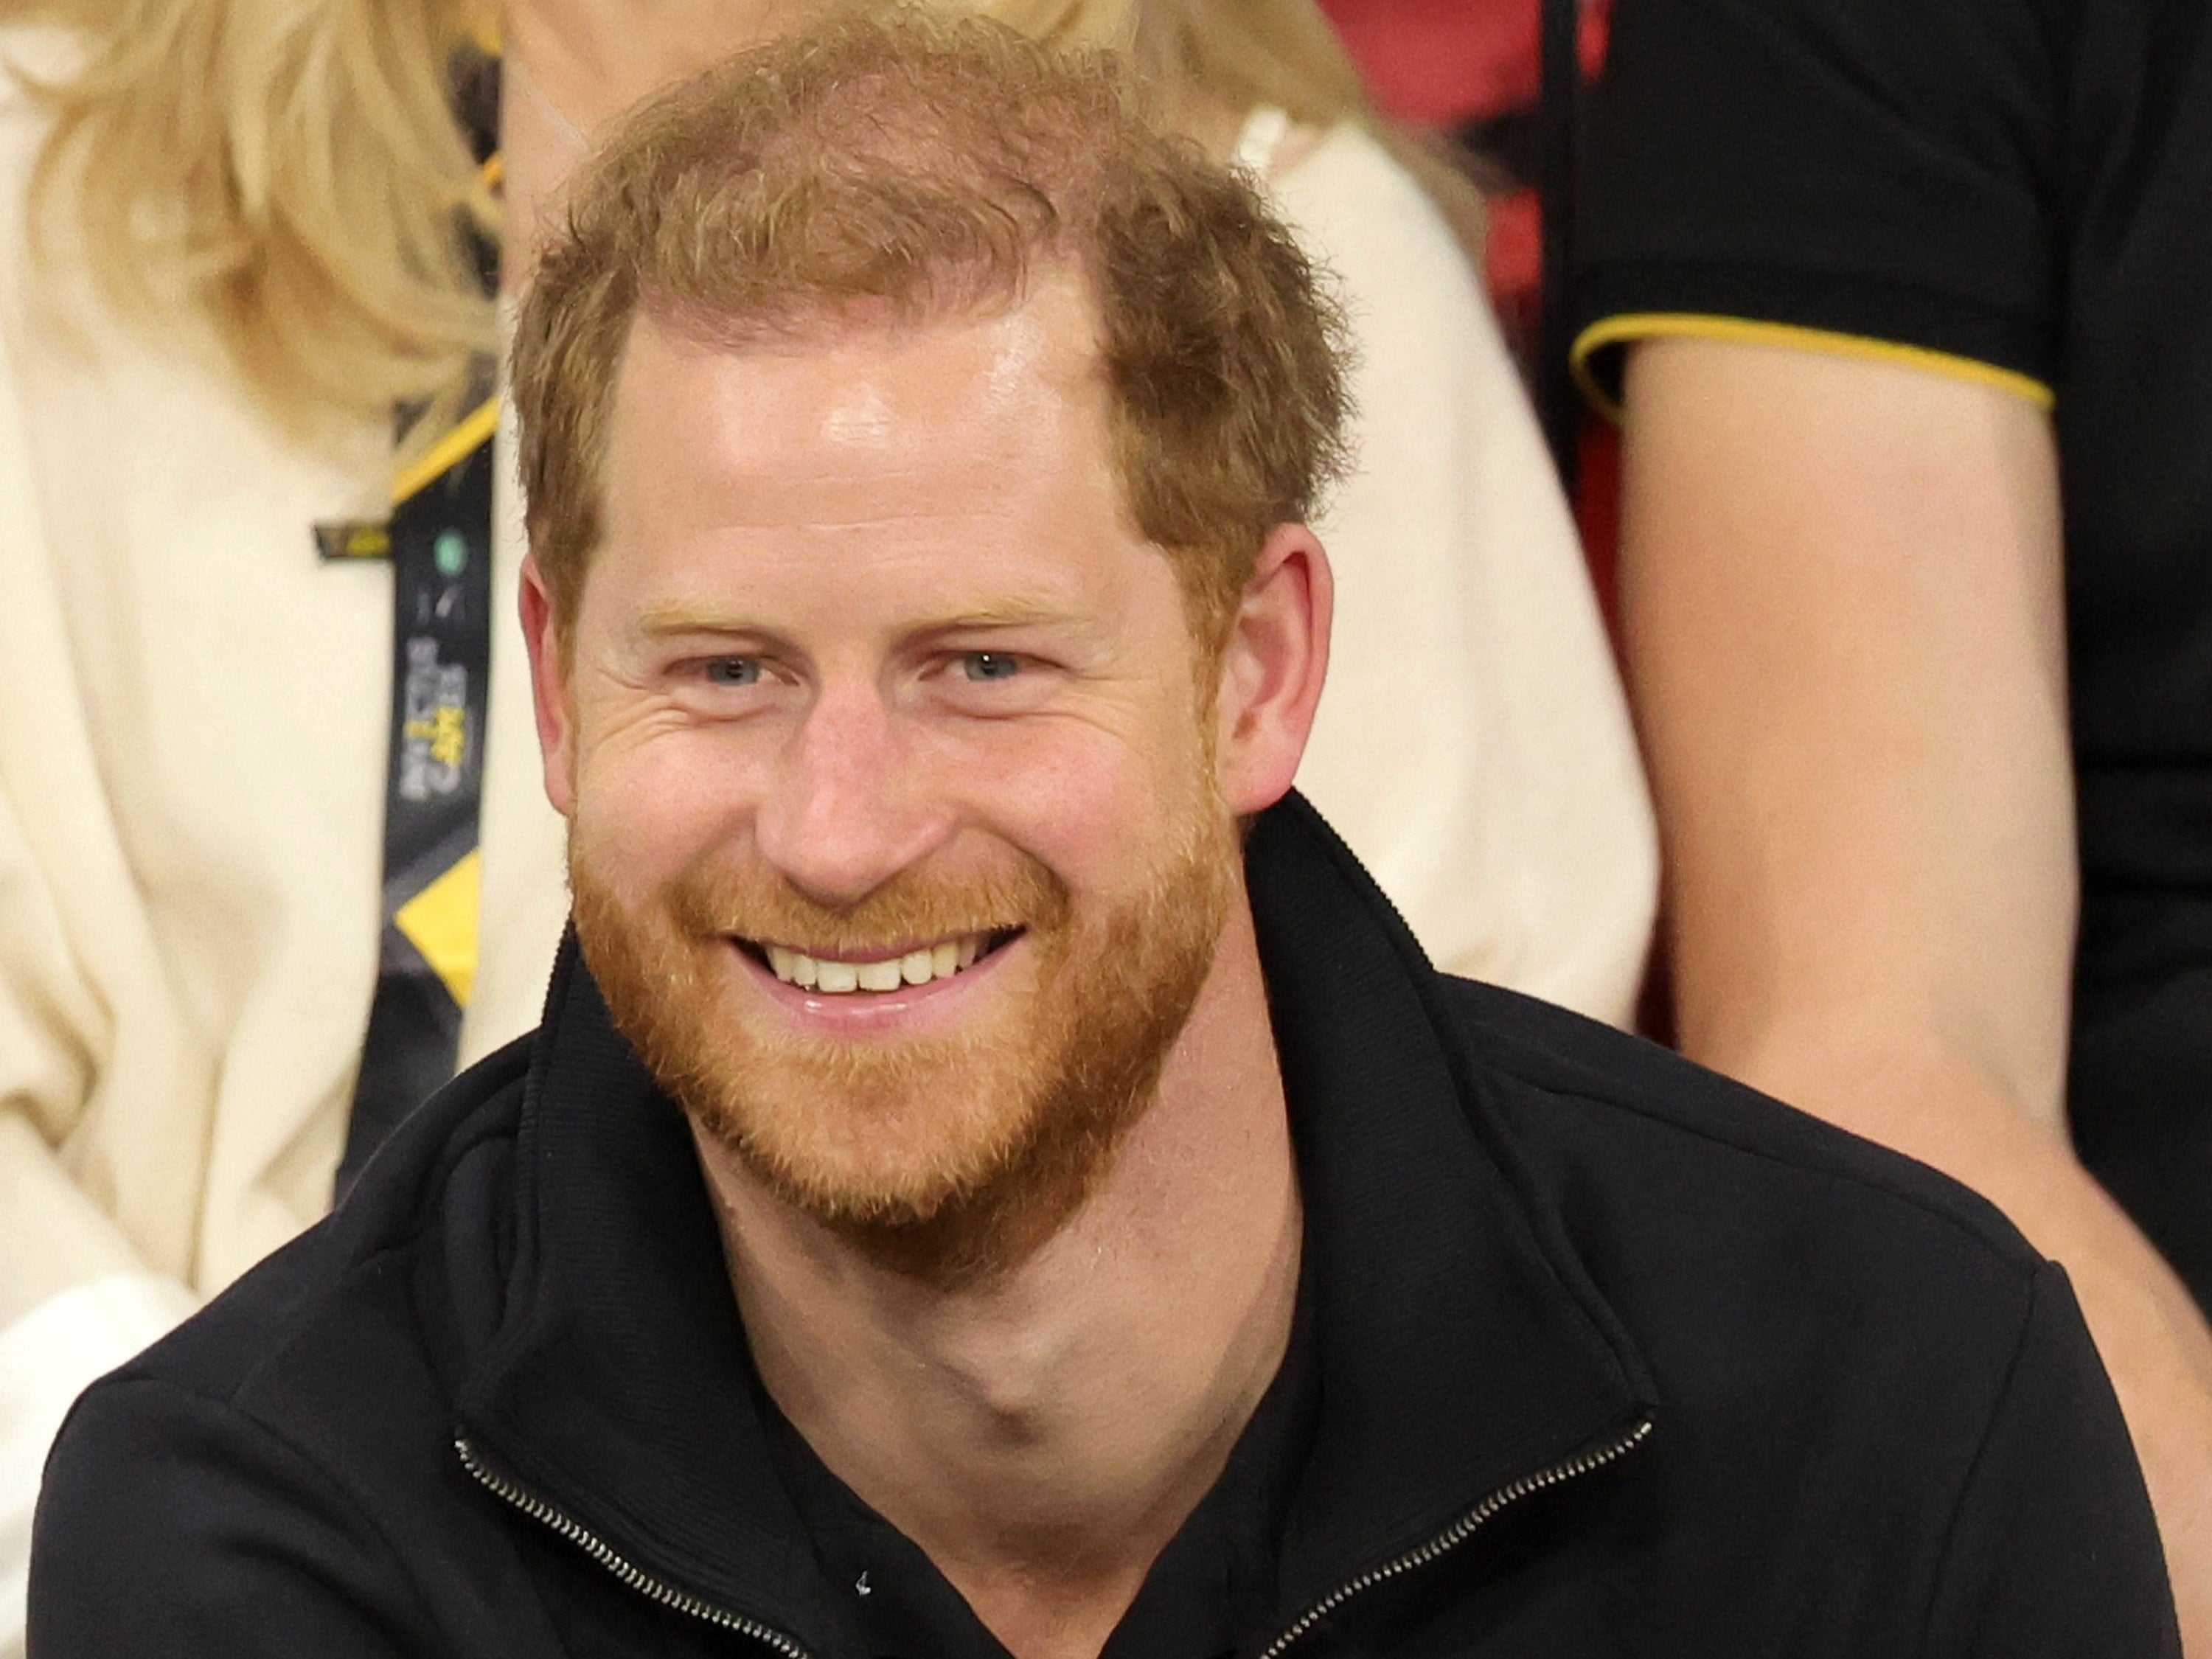 Prince Harry at the Invictus Games on 17 April 2022